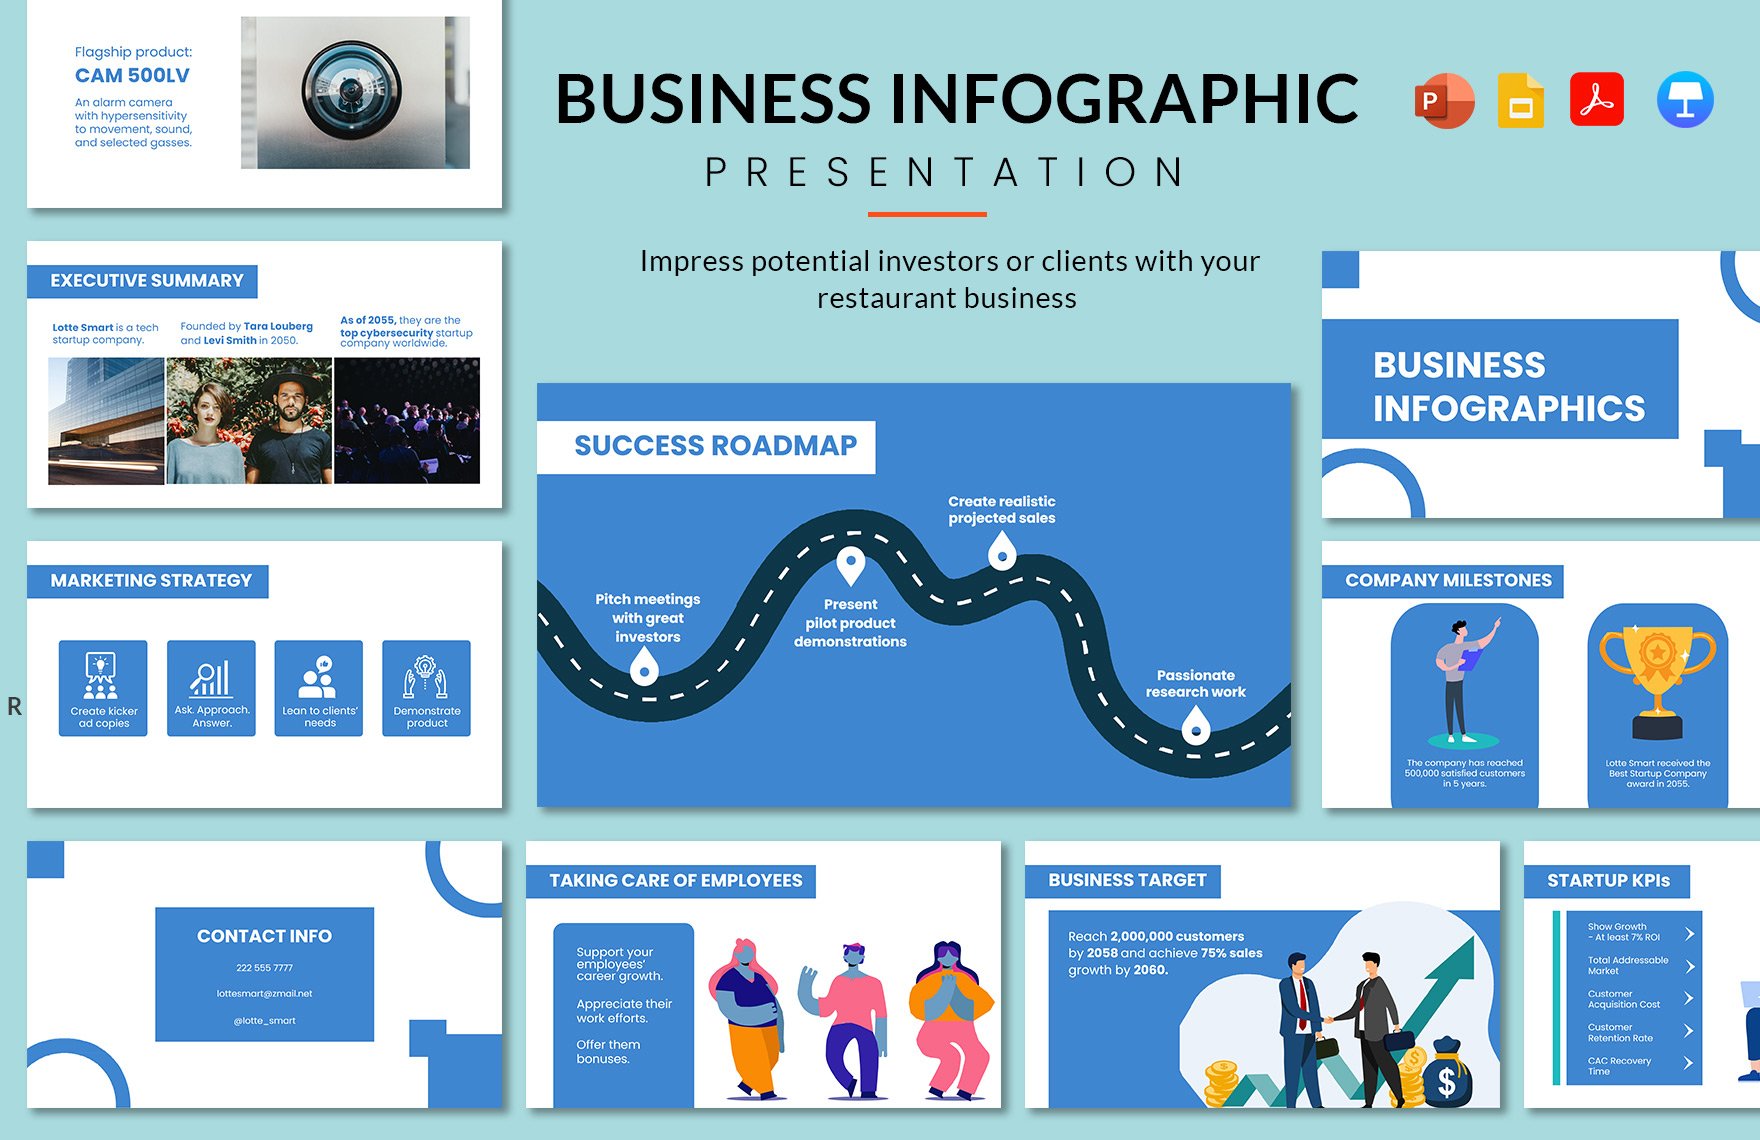 Business Infographic Presentation Template